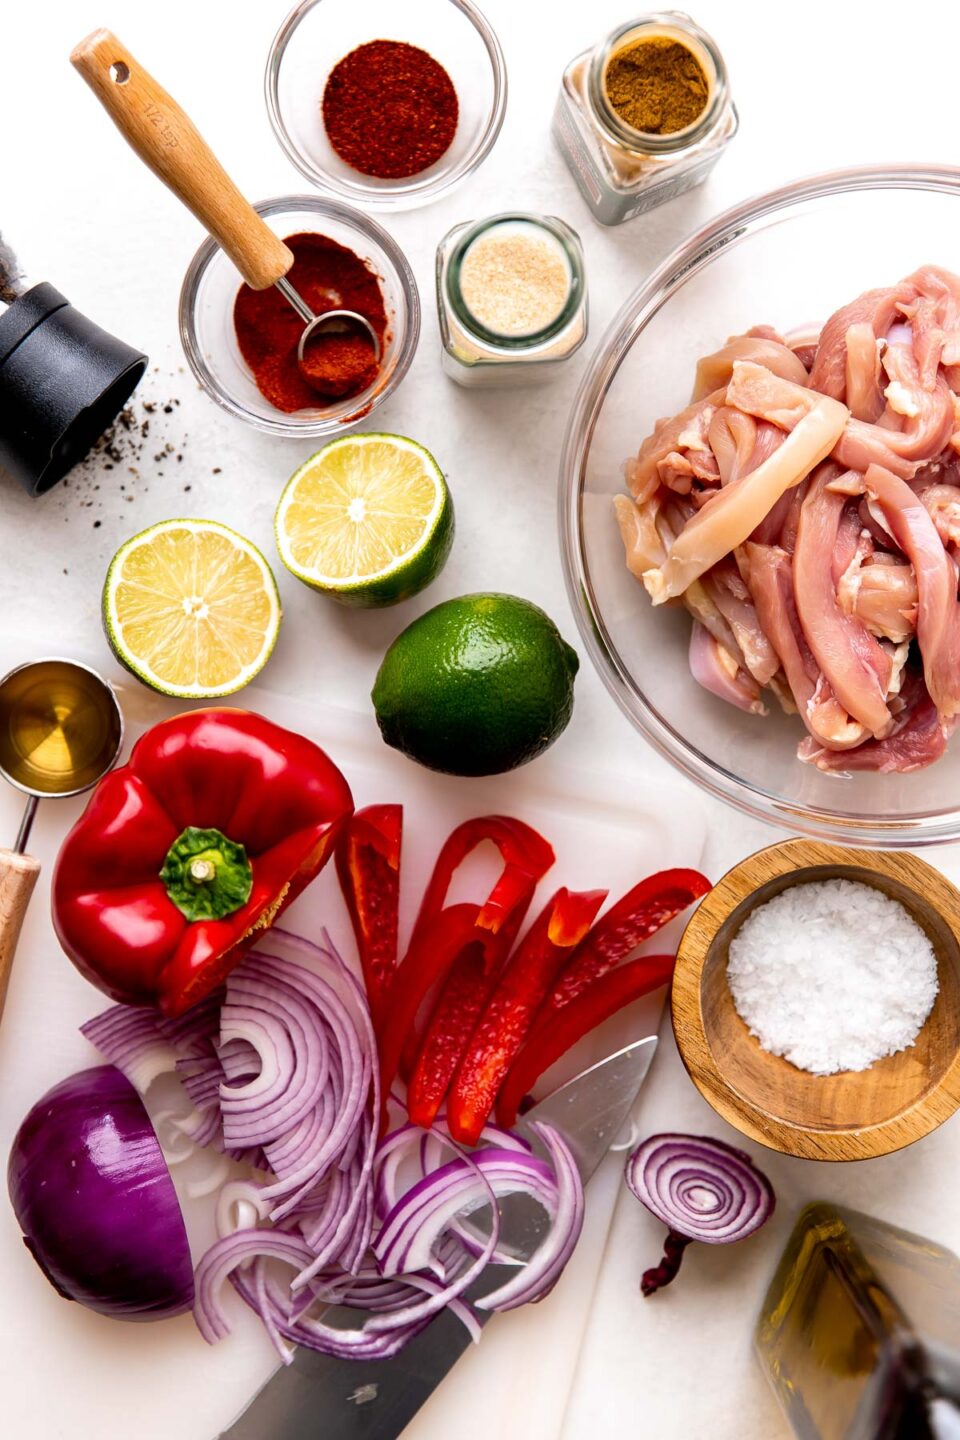 Skillet chicken fajita ingredients arranged on a creamy white textured surface: boneless, skinless chicken thighs or breasts, limes, olive oil, agave nectar, ancho chili powder, ground cumin, smoked paprika, garlic powder, bell pepper, red onion, kosher salt, and ground black pepper.